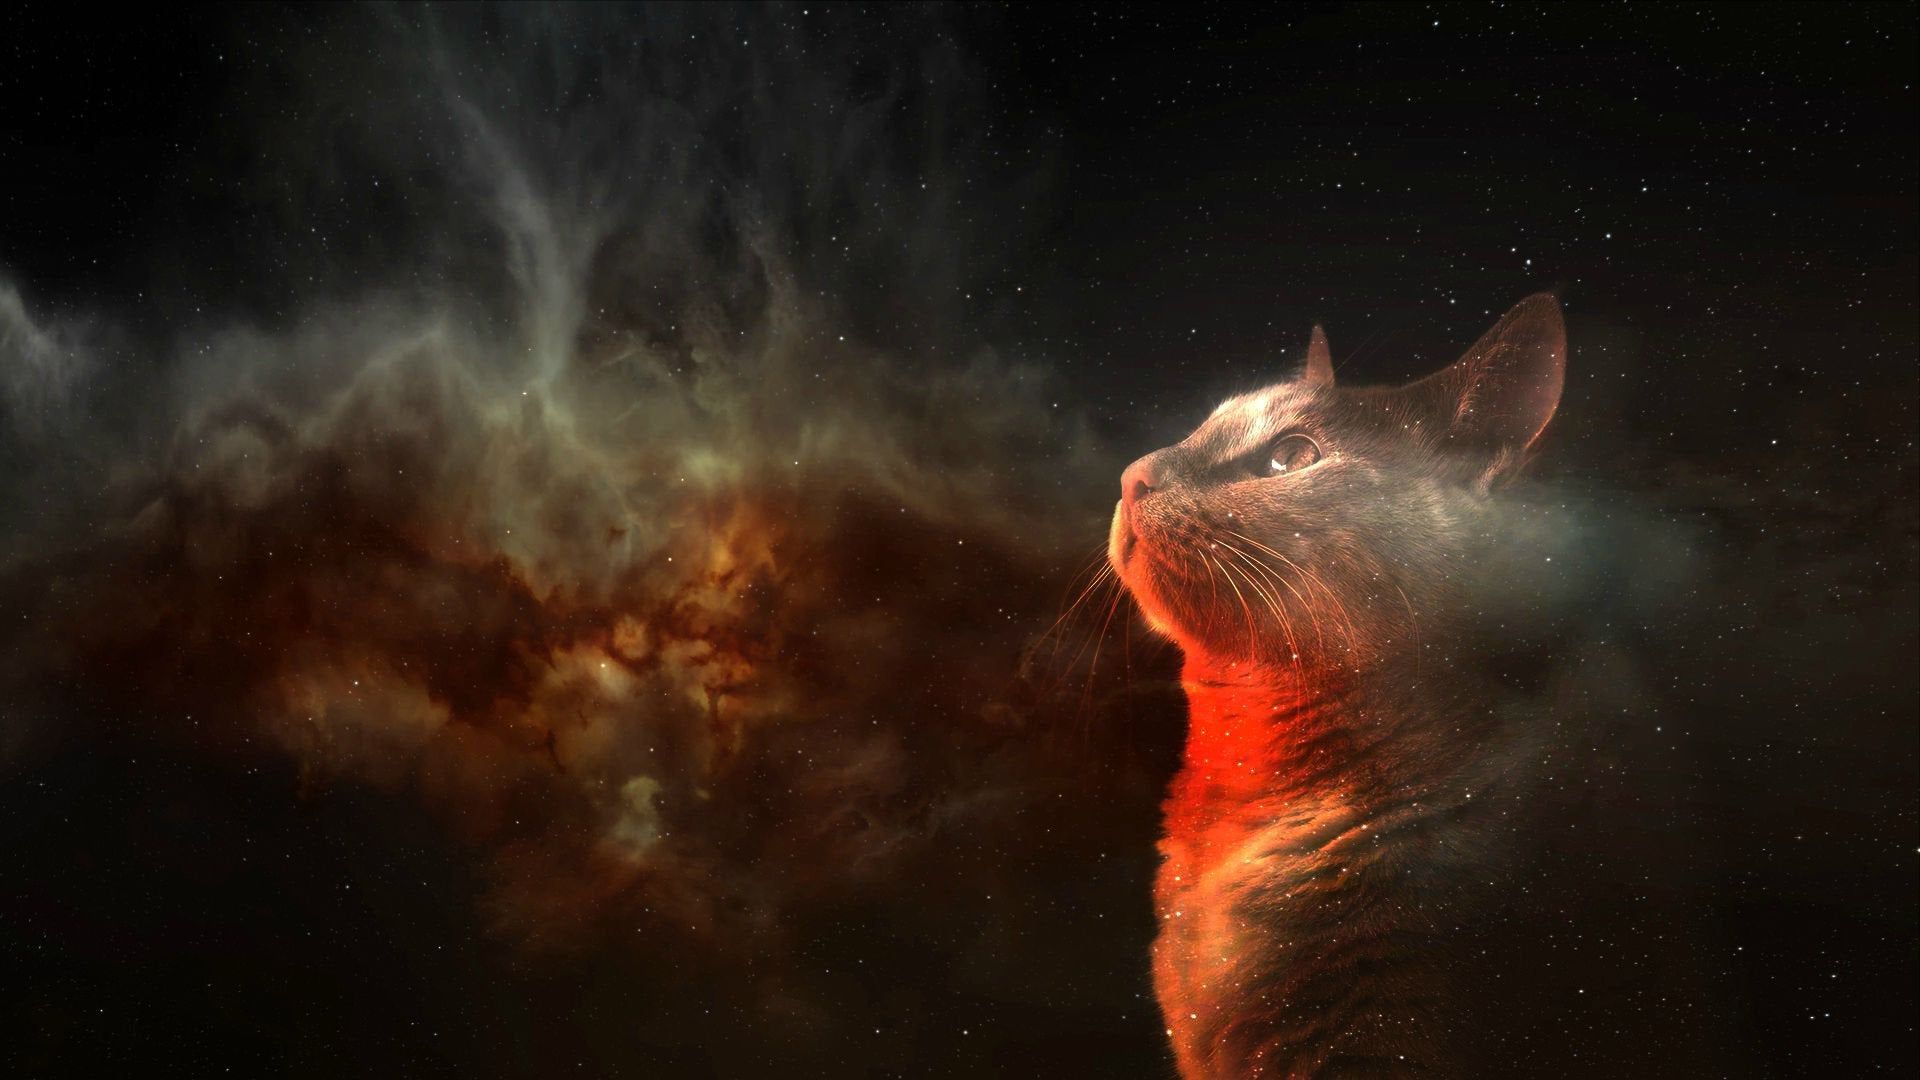 Cats in Space (1920x1080)